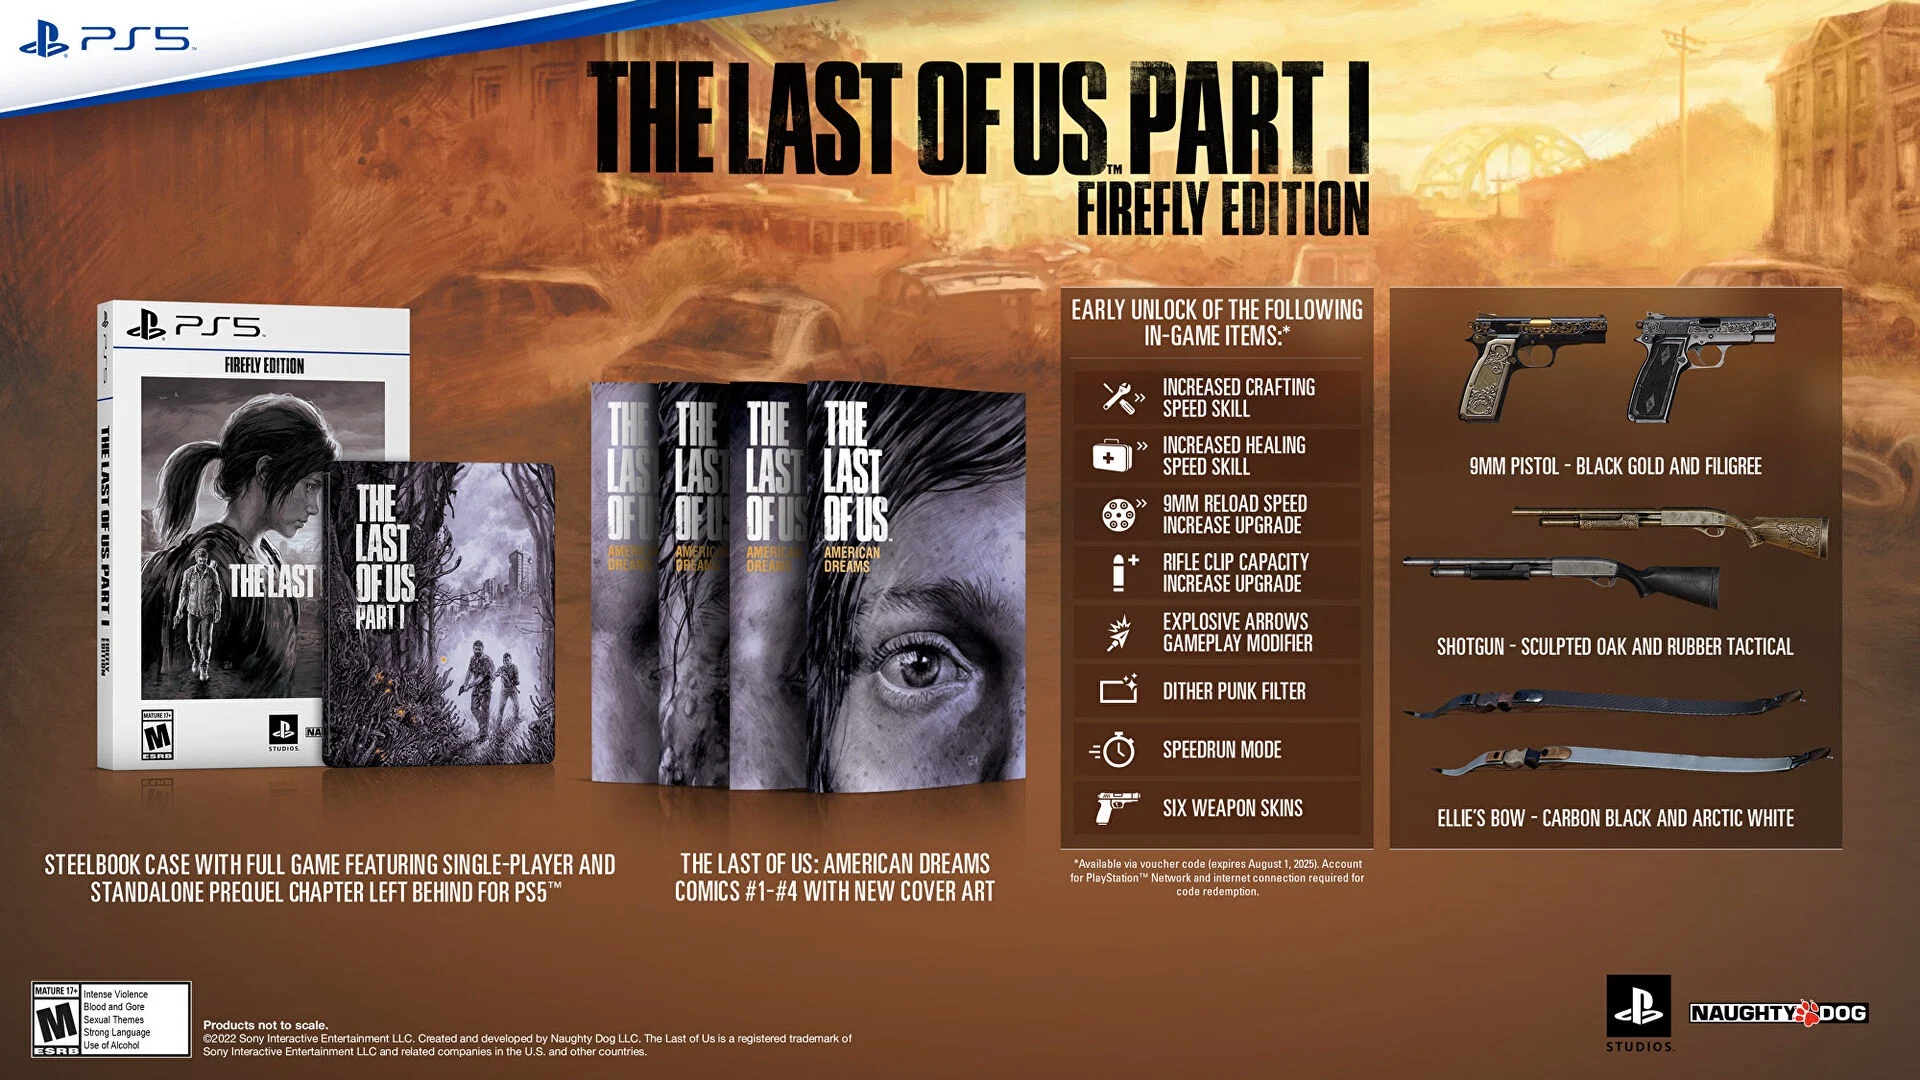 Sony has opened pre-orders for The Last of Us Part I Firefly Edition in Europe. The edition will appear in January 2023-2